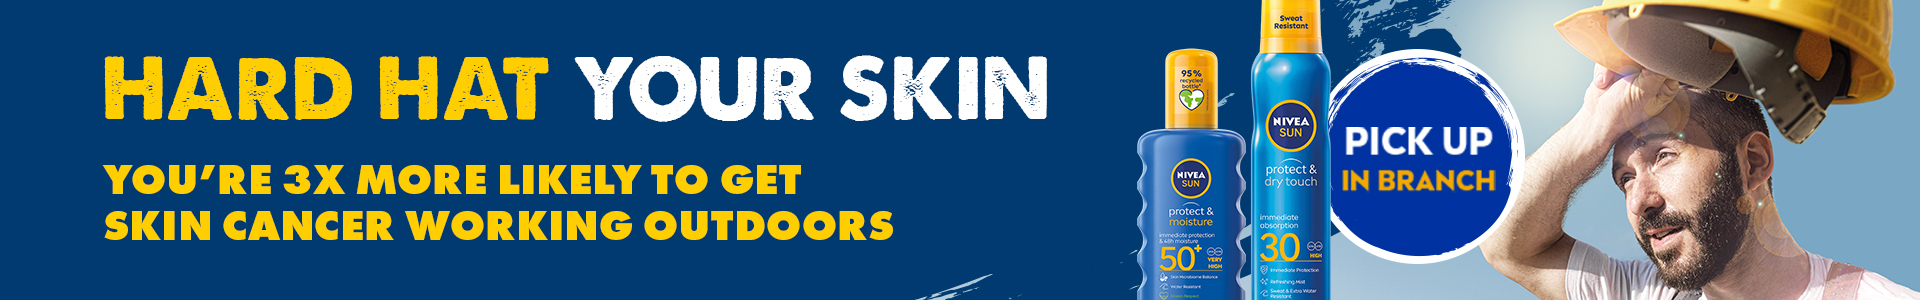 Hard hat your skin with Nivea products at Jewson